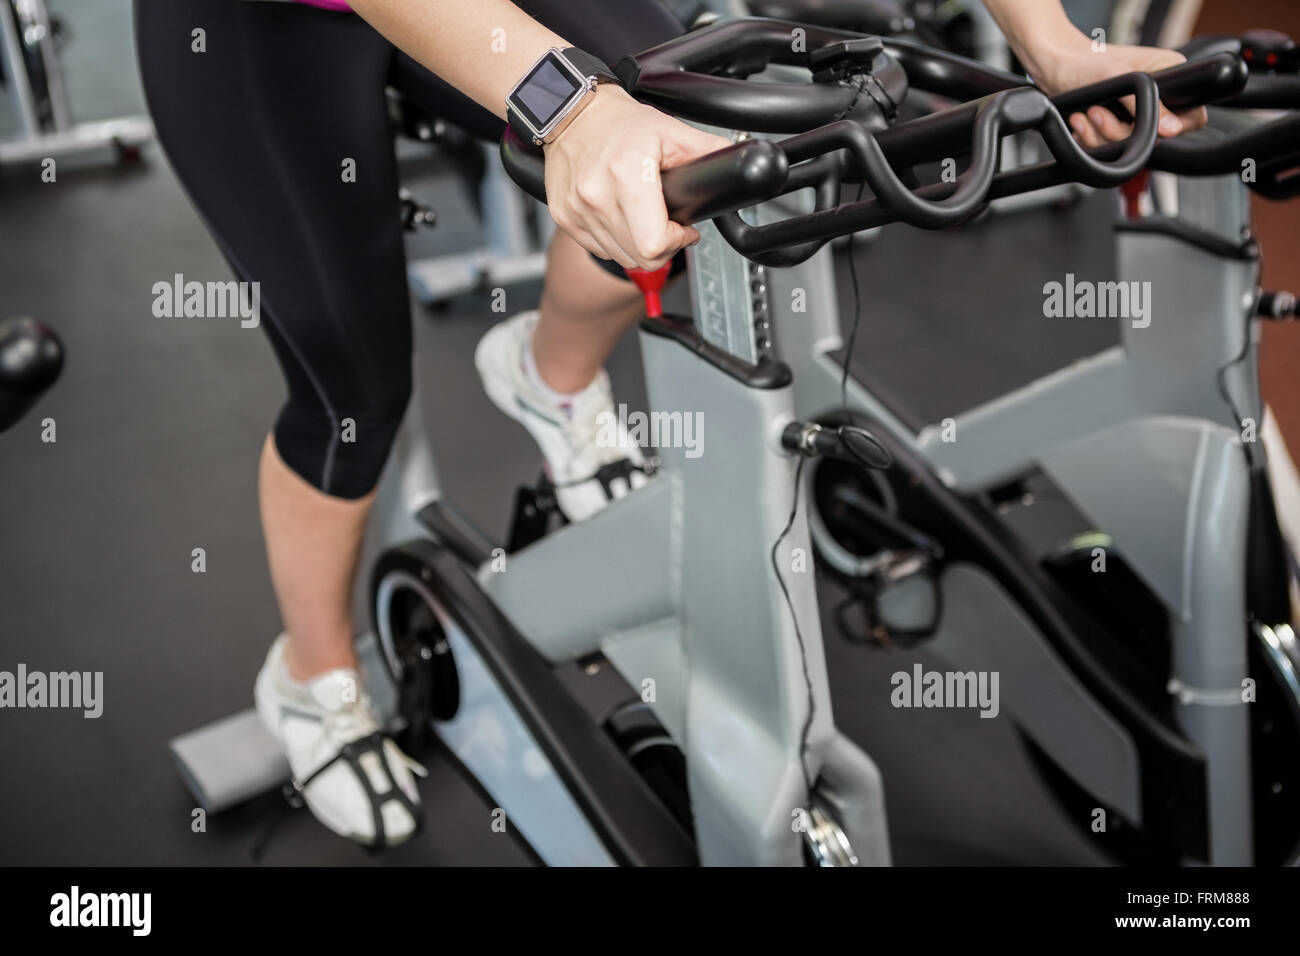 Woman on exercise bike at spinning class Banque D'Images